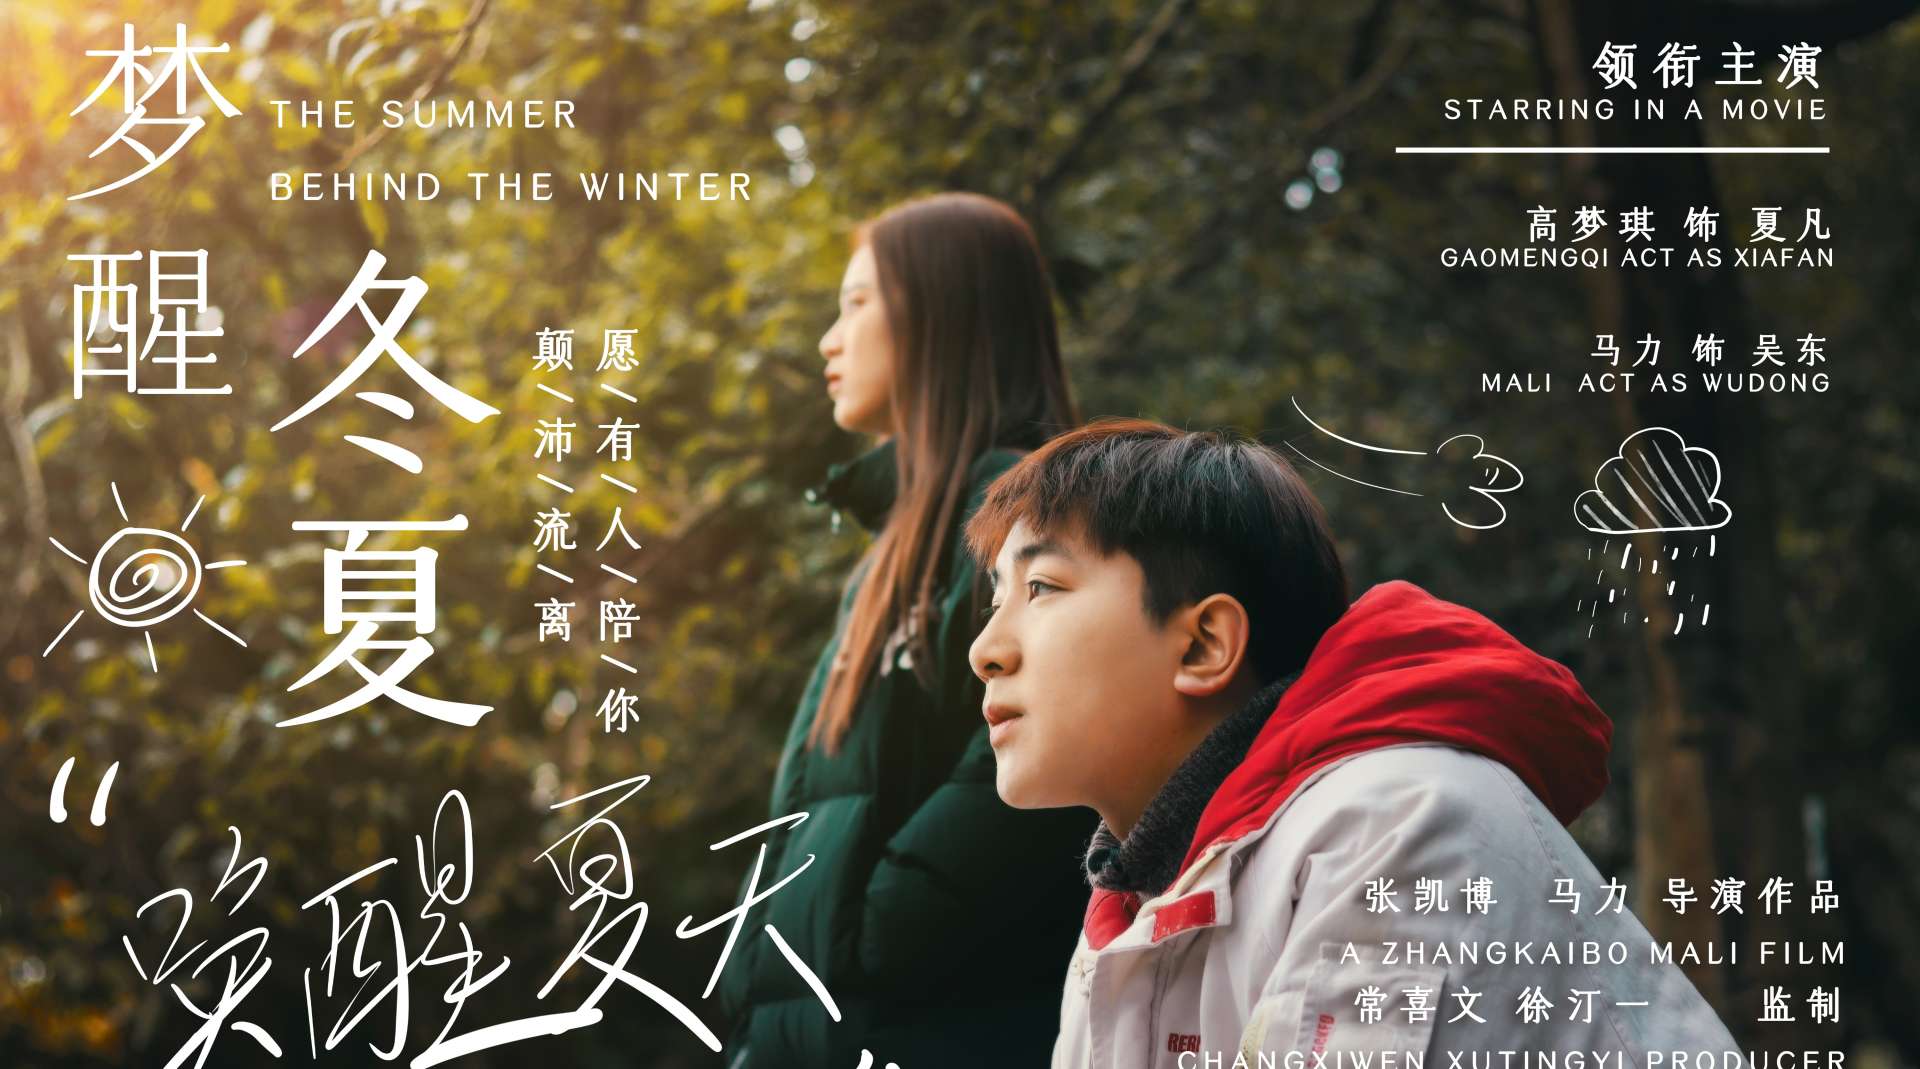 THE SUMMER BEHIND THE WINTER | 梦醒冬夏